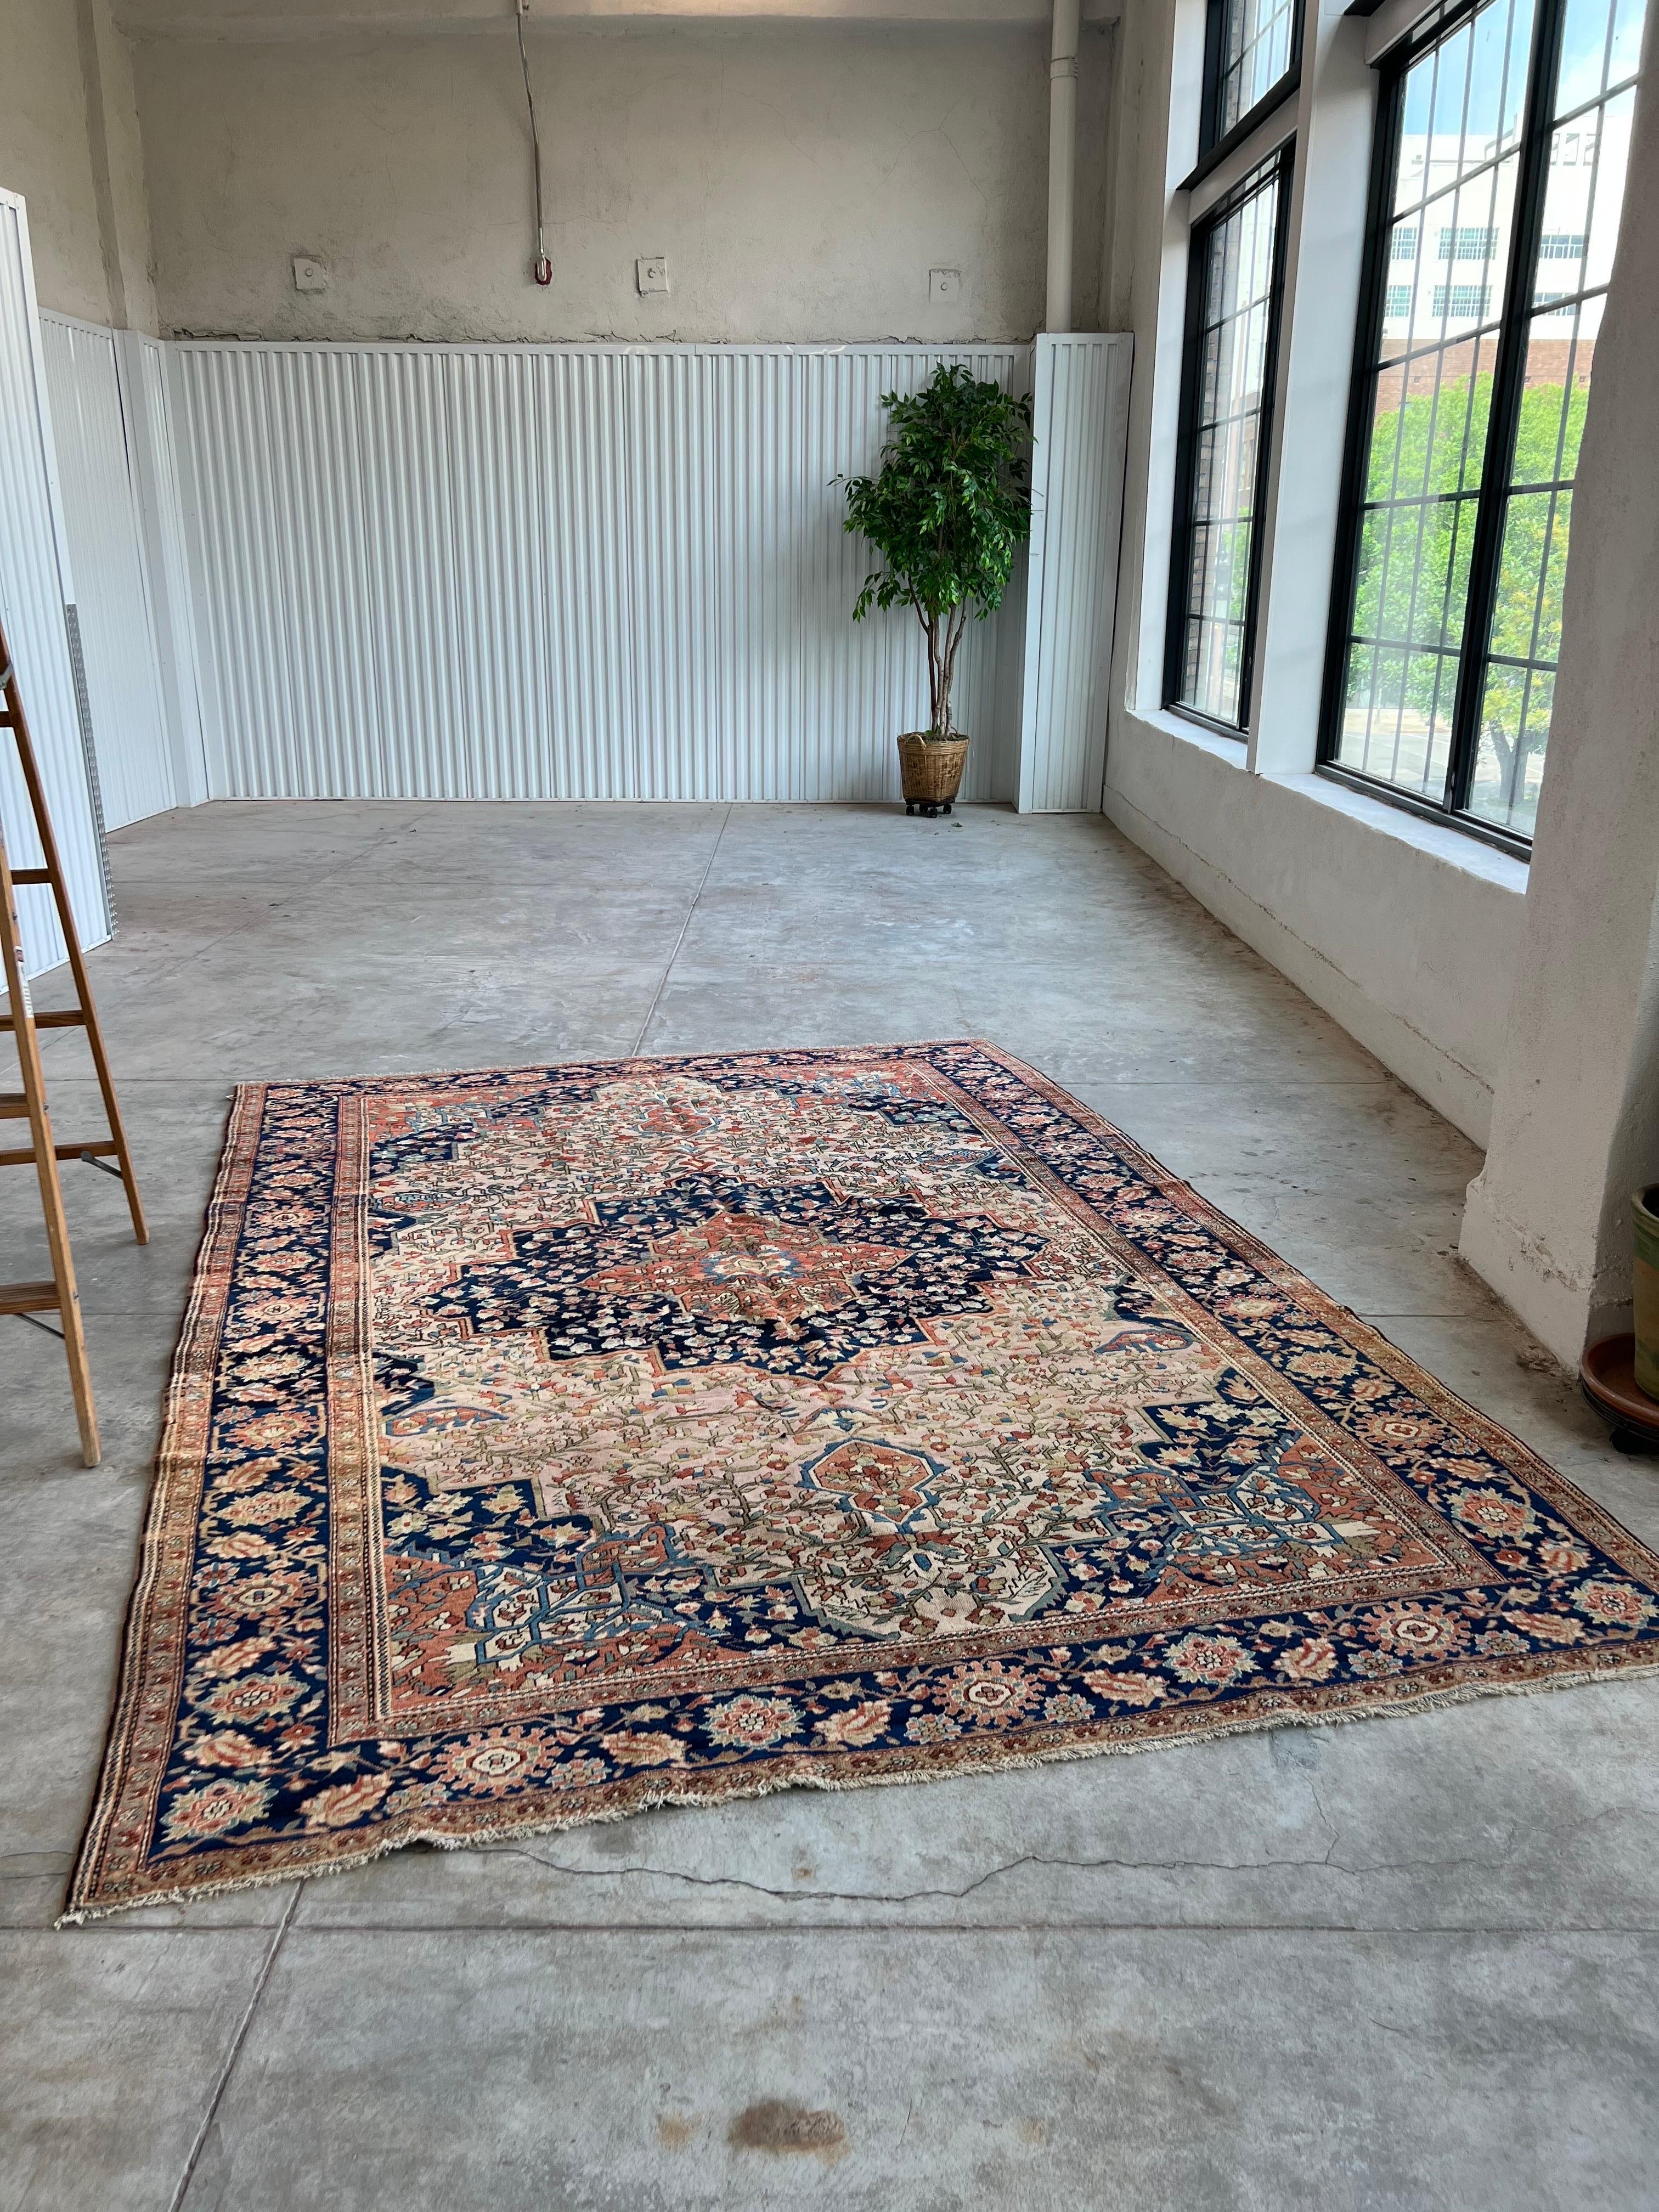 7’2 x 10’3

If you're a collector, an antique Persian Farahan Sarouk must be on your list! This antique masterpiece is truly incredible to behold in person. The colors feel like spring! Great condition. Even wool pile. This rug is made with a blue